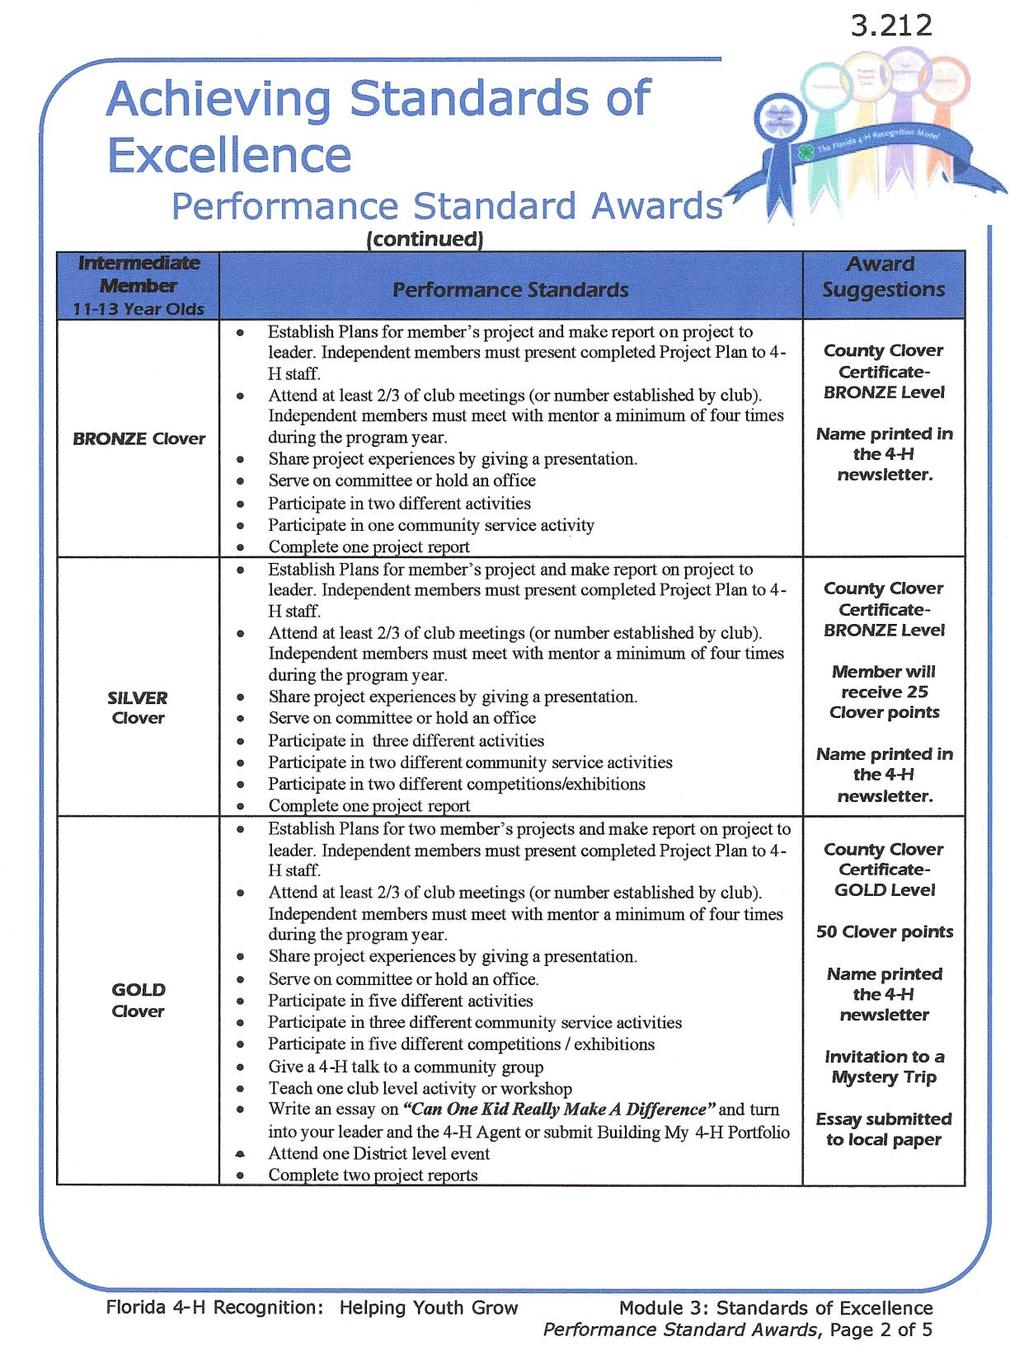 Clover Awards are also called Performance Standard Awards.